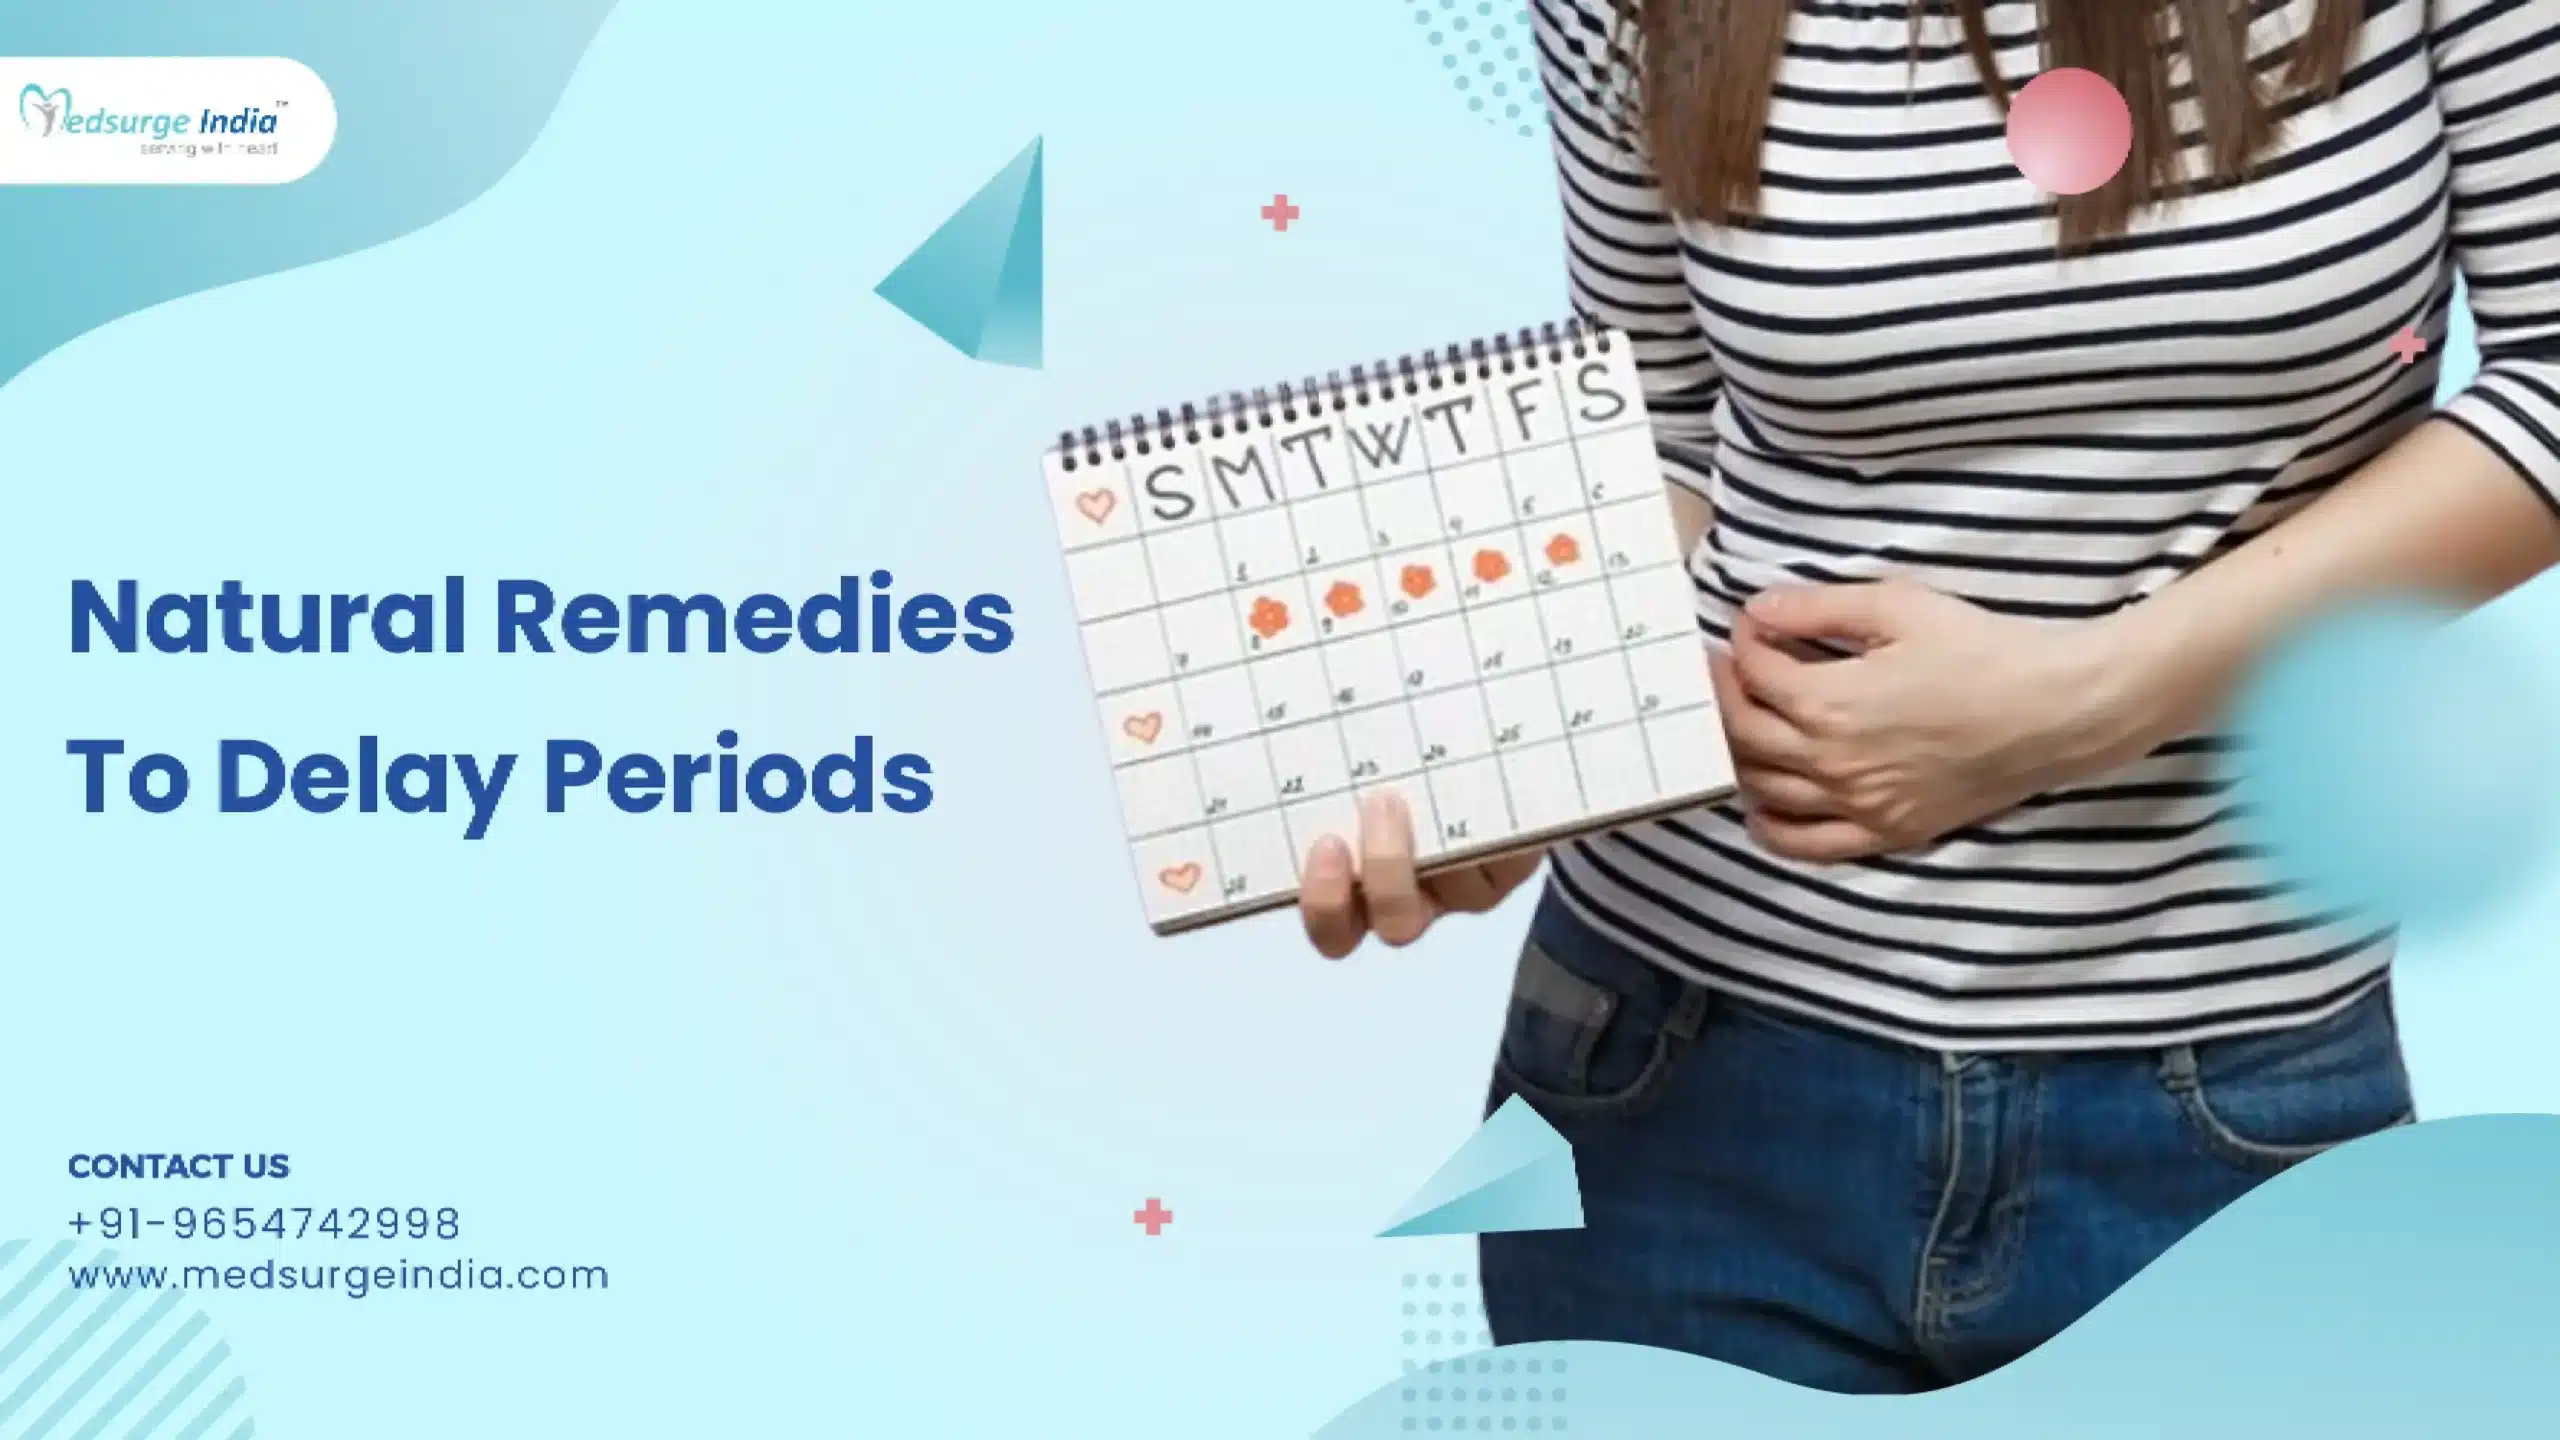 11 Foods That Can Delay Periods Naturally!!